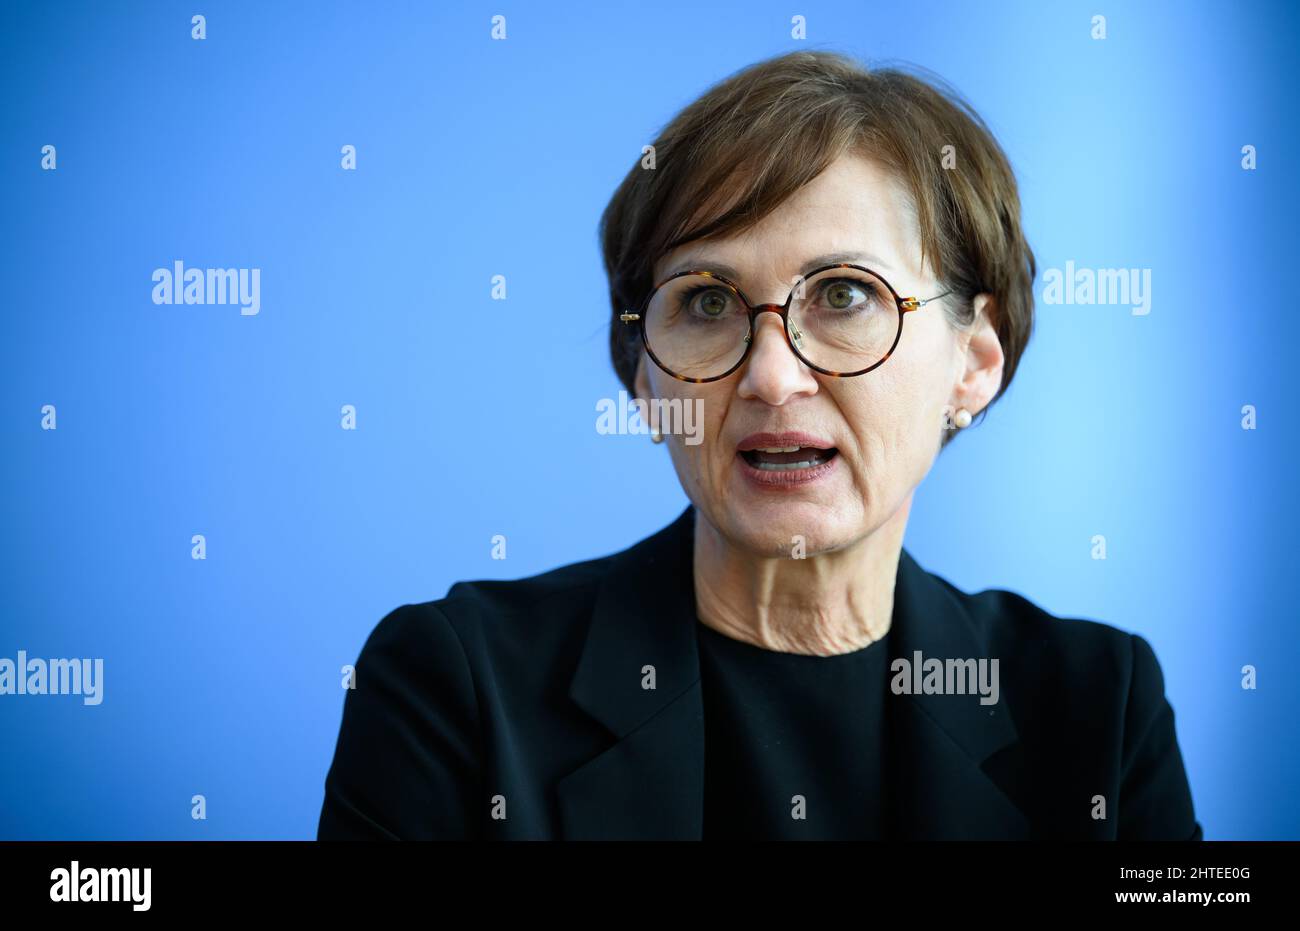 Berlin, Germany. 28th Feb, 2022. Bettina Stark-Watzinger (FDP), Federal Minister of Education and Research, speaks at a press conference on the national launch of the 6th Assessment Report of the Intergovernmental Panel on Climate Change (IPCC). The report of the IPCC, also known as the Intergovernmental Panel on Climate Change, summarizes the scientific state of the art on the scientific basis of climate change, its causes and extent. Credit: Bernd von Jutrczenka/dpa/Alamy Live News Stock Photo